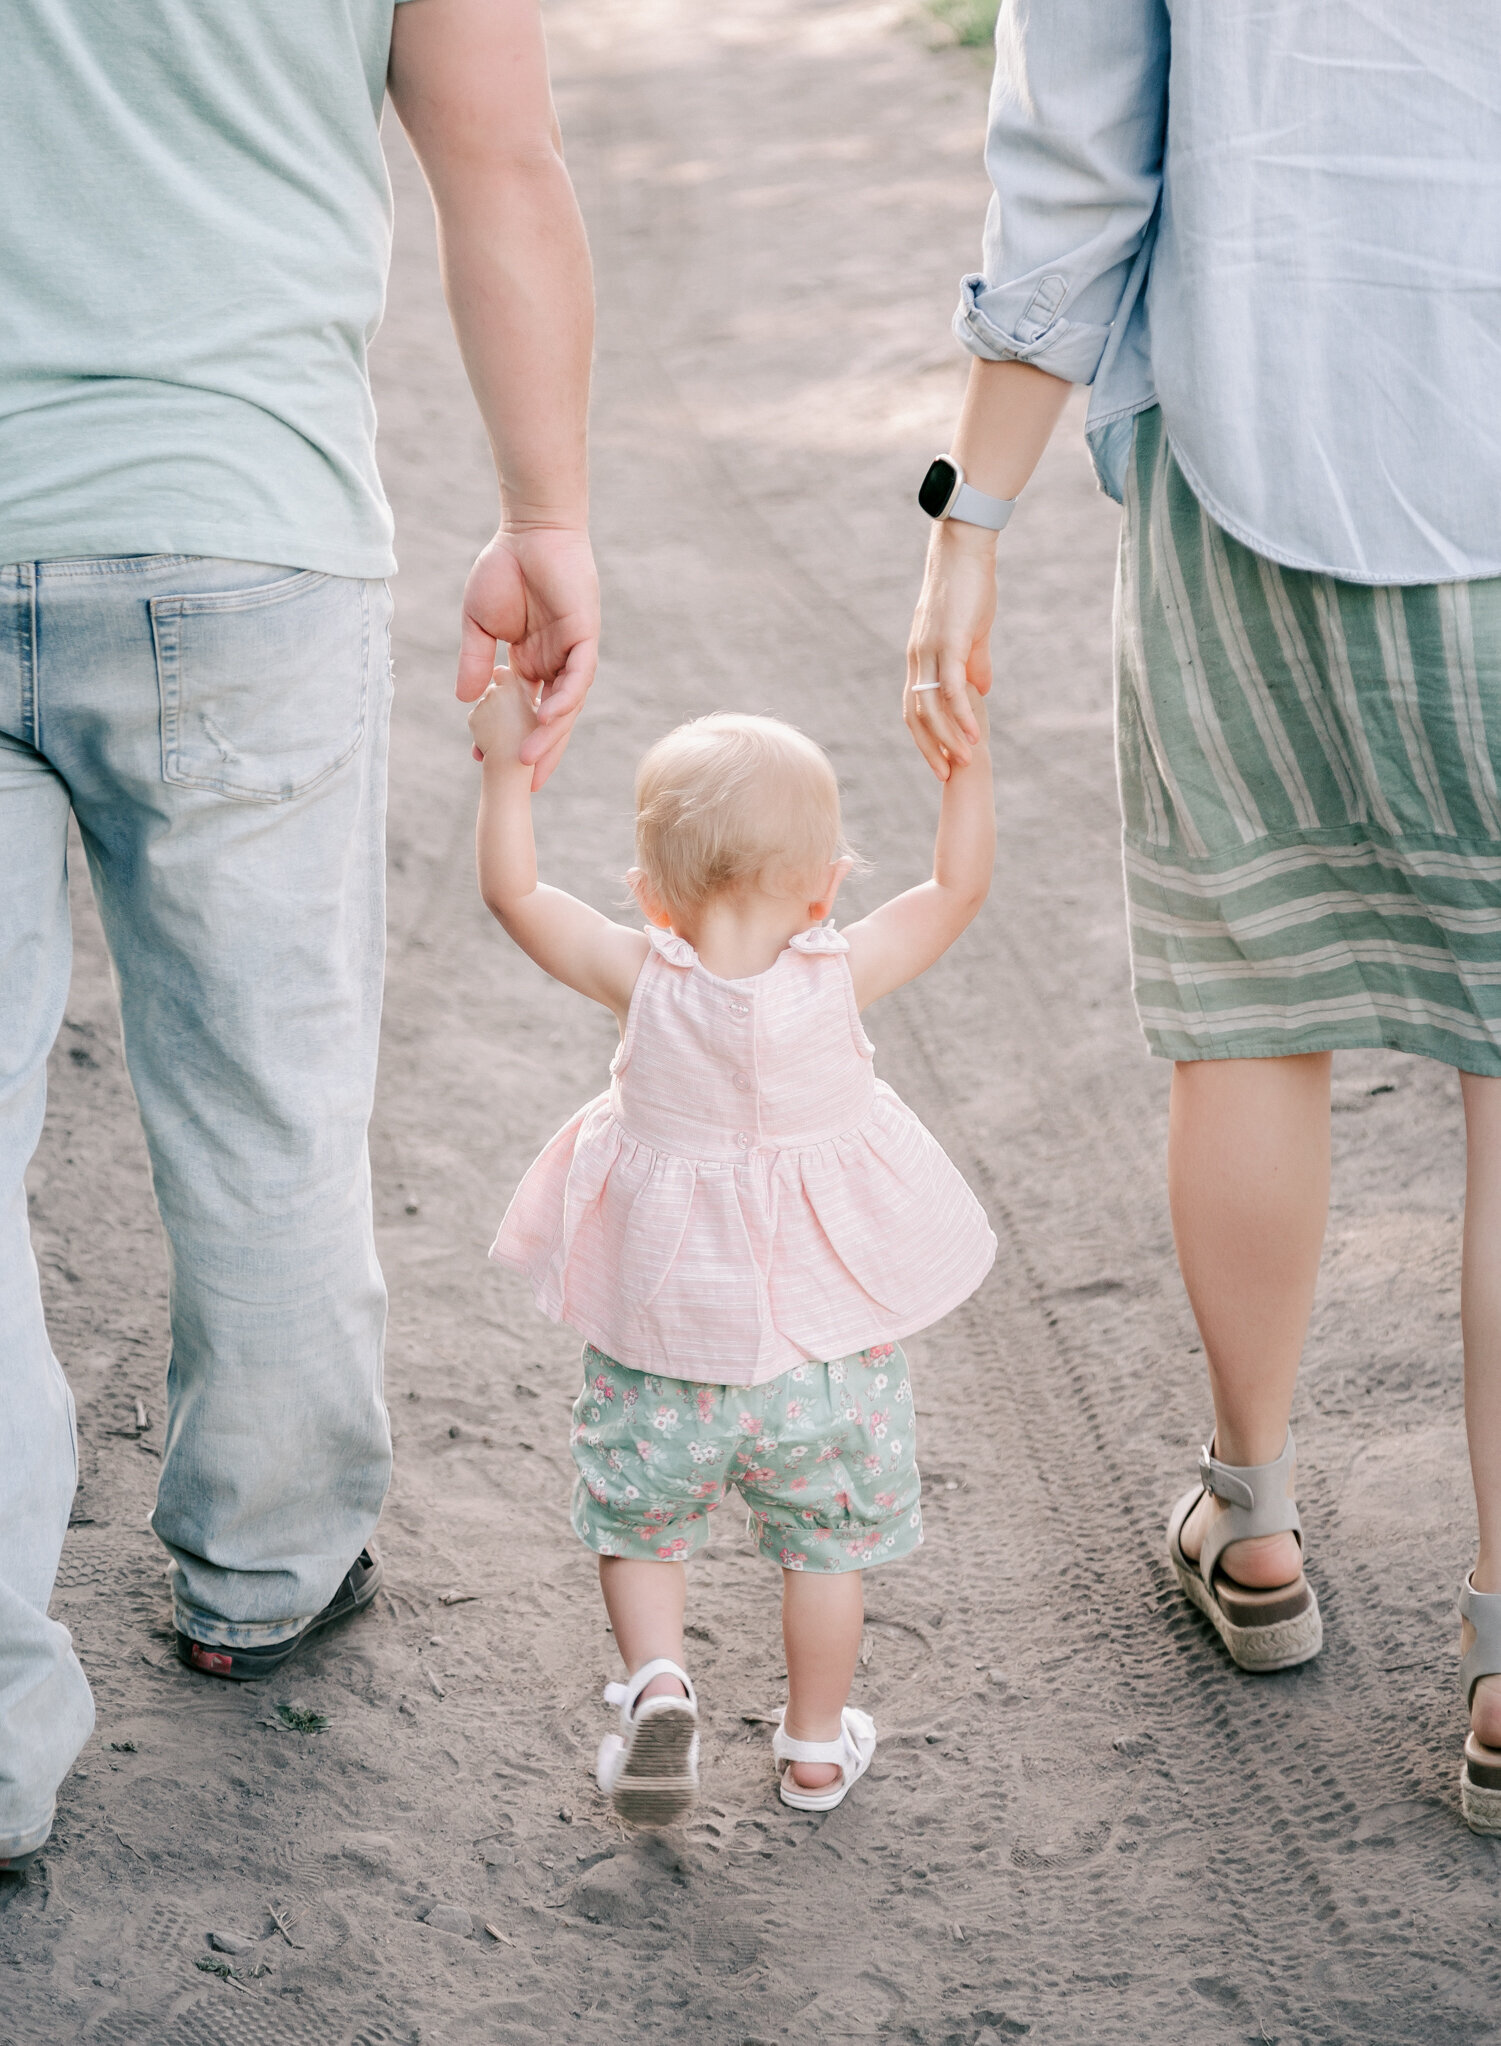 A small child holds her parents hands during a family session. Photo by Diane Owen.